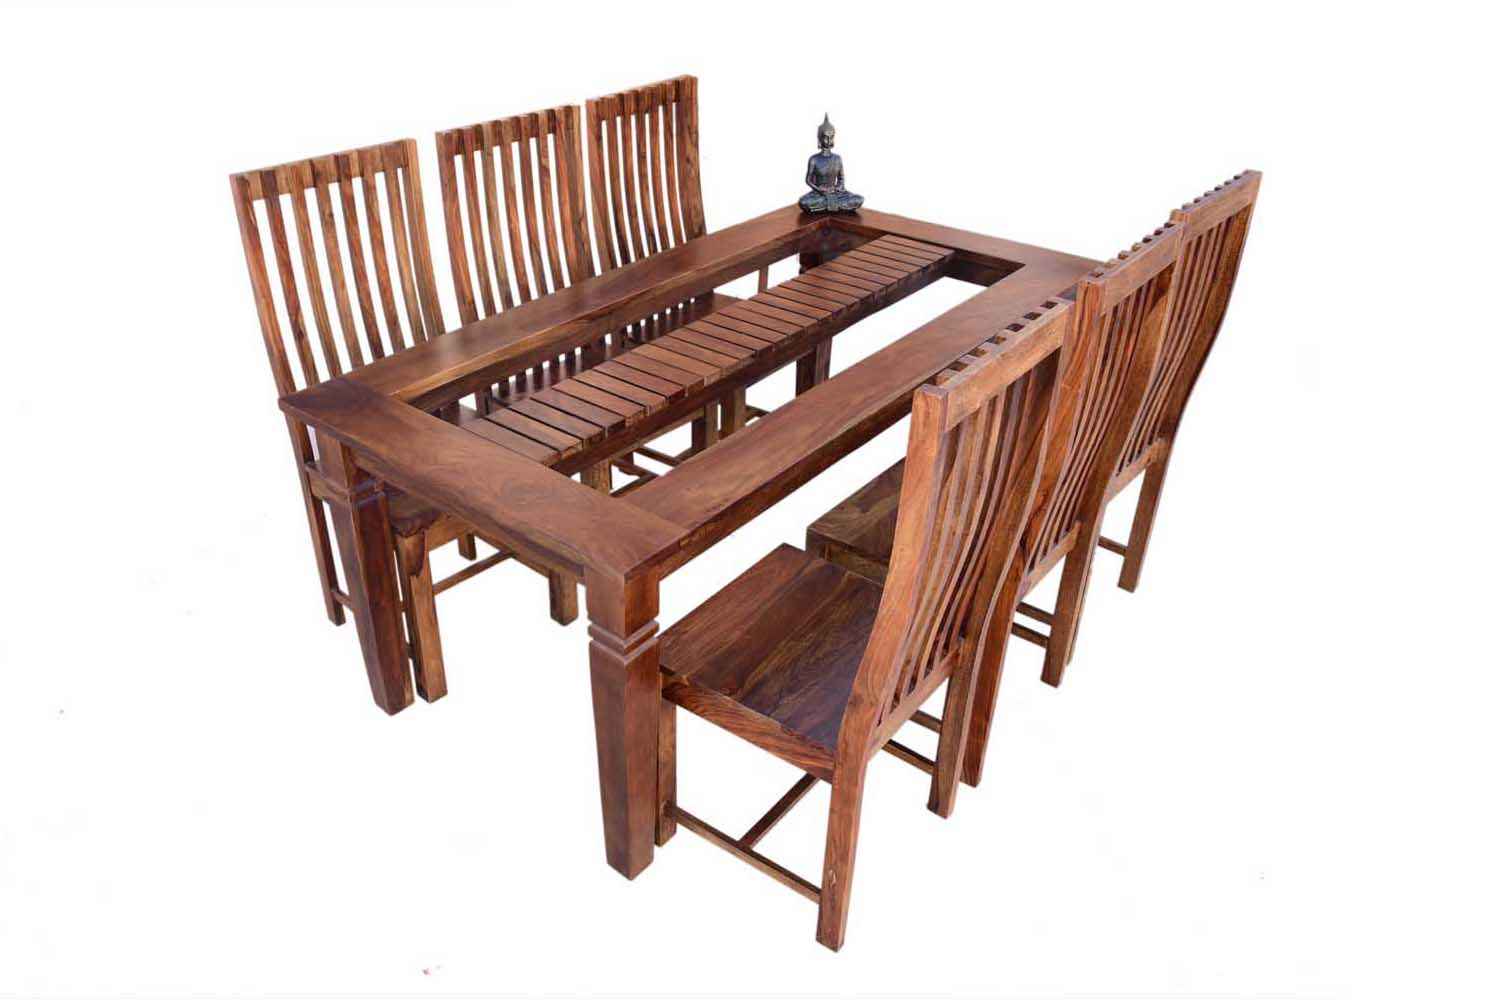 Buy 8 Seater swingo dining table with zernal wooden chair | Dining Room, 8 Seater Dining Table ...